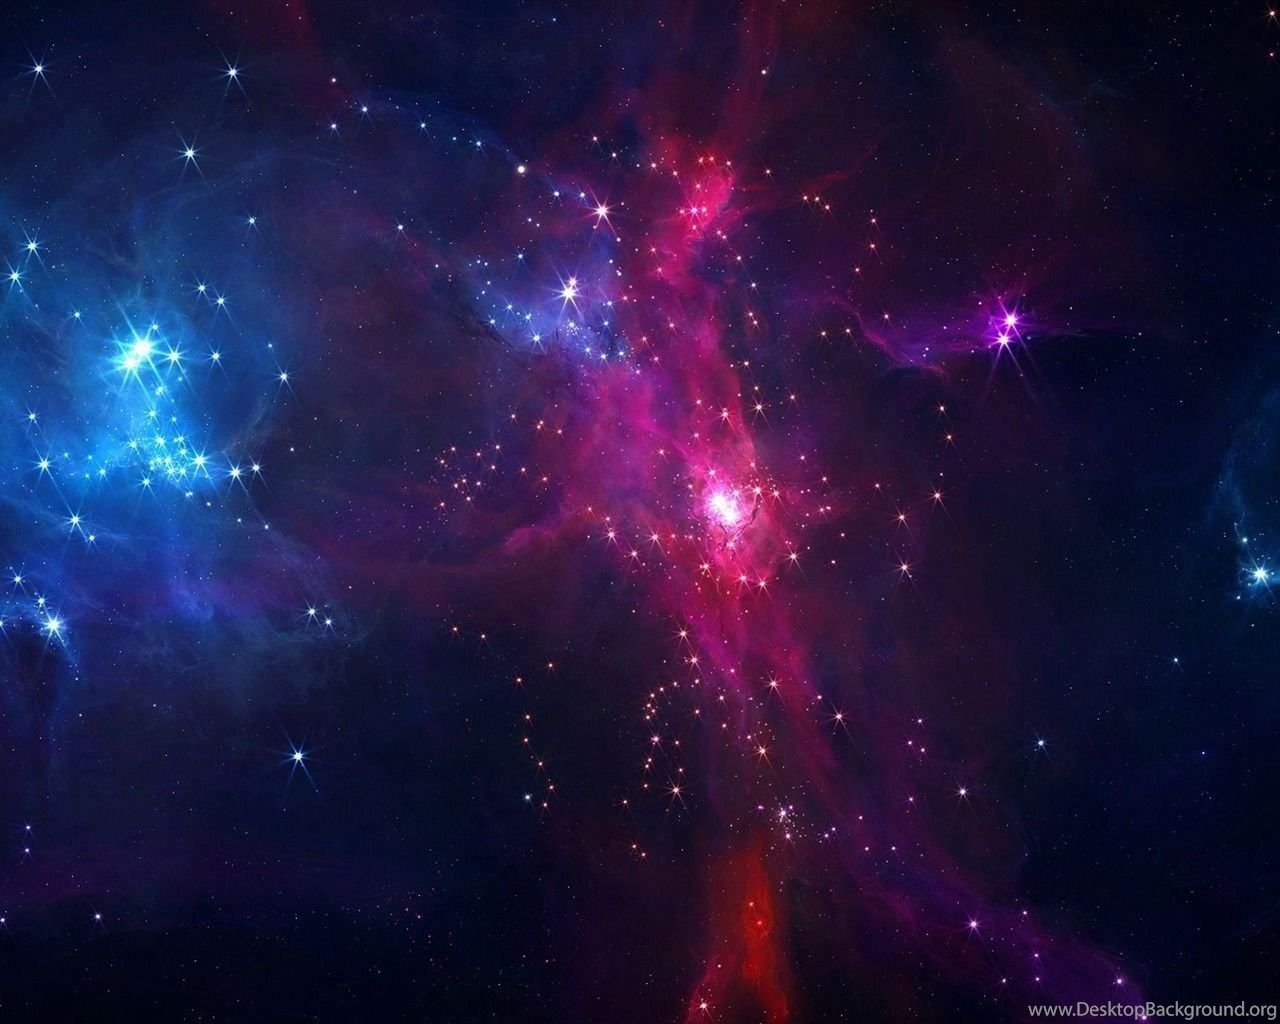 A collection of beautiful space wallpapers for desktop. - 1280x1024